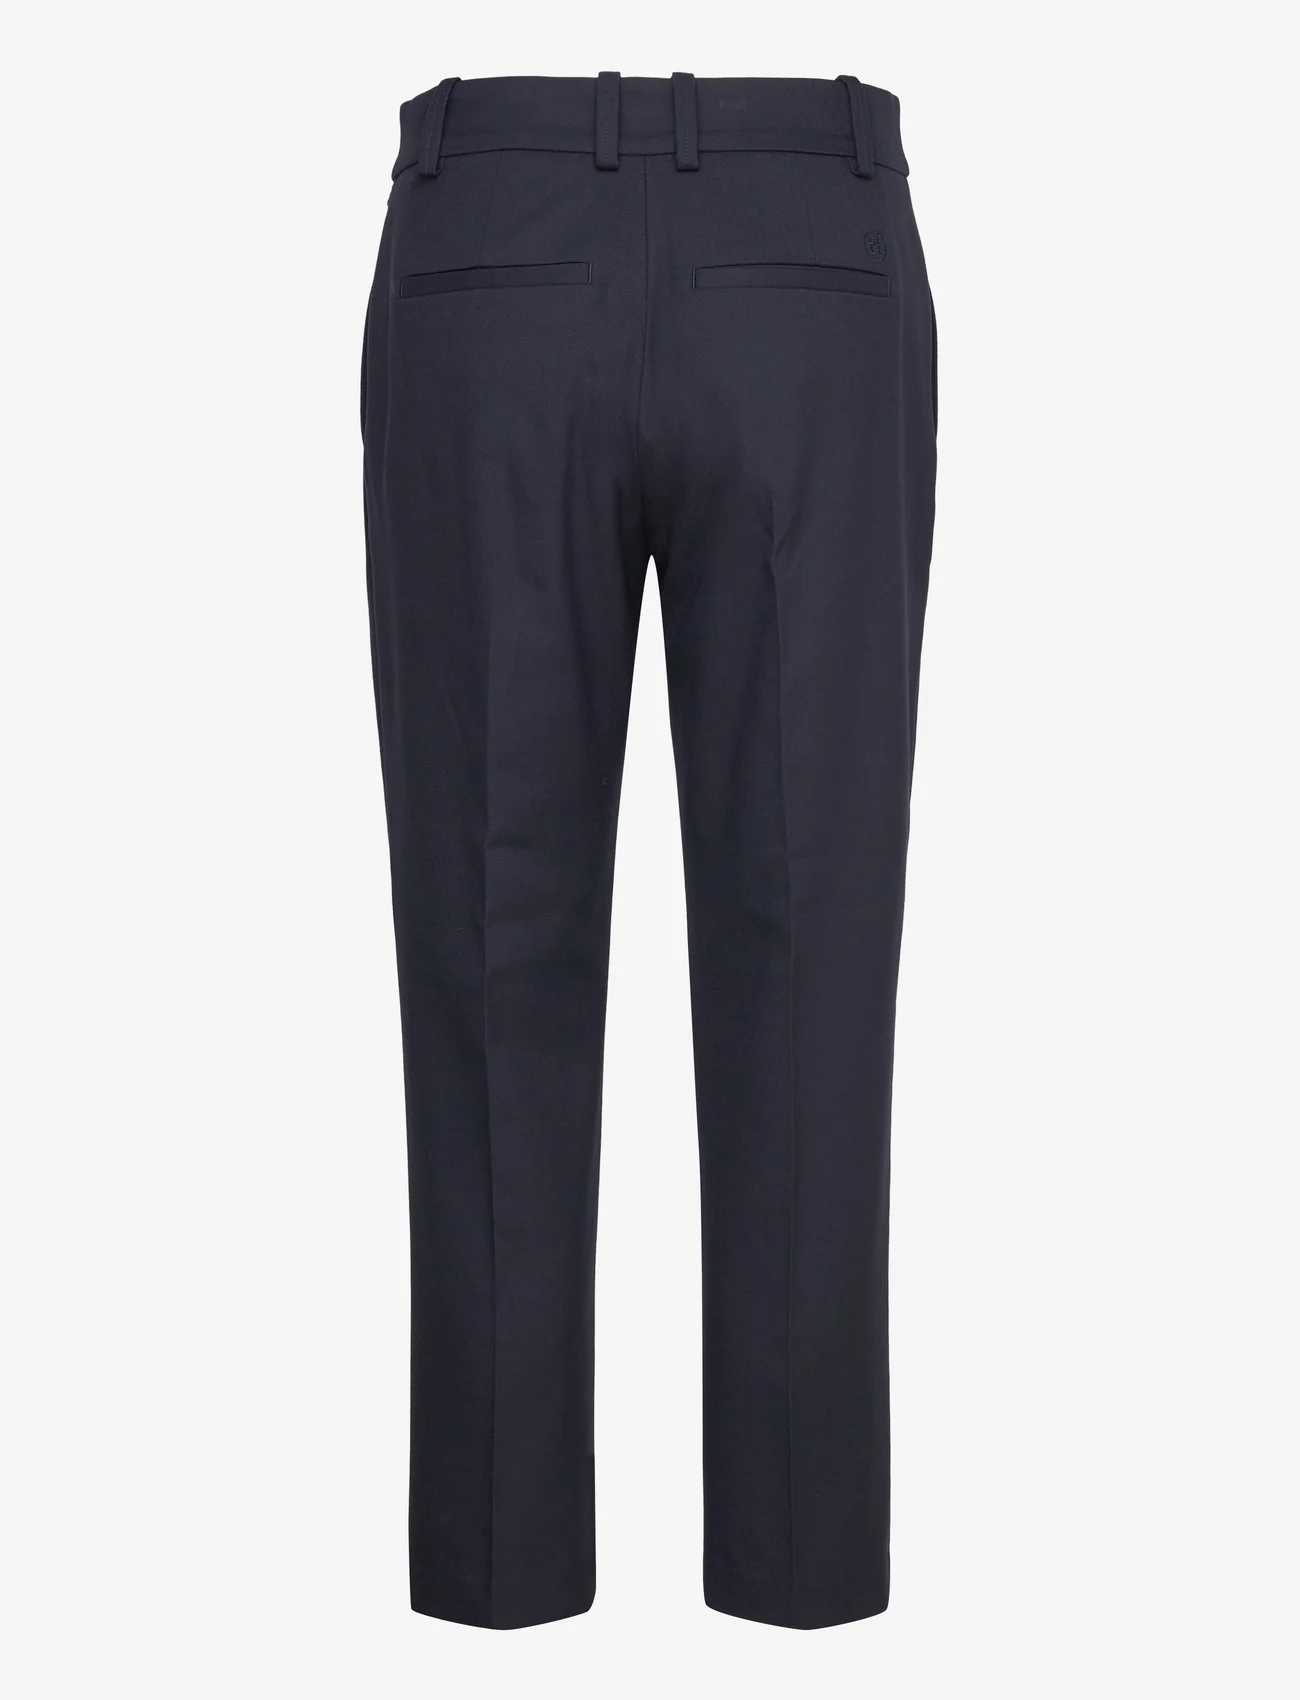 Tommy Hilfiger - CORE SLIM STRAIGHT PANT - tailored trousers - desert sky - 1